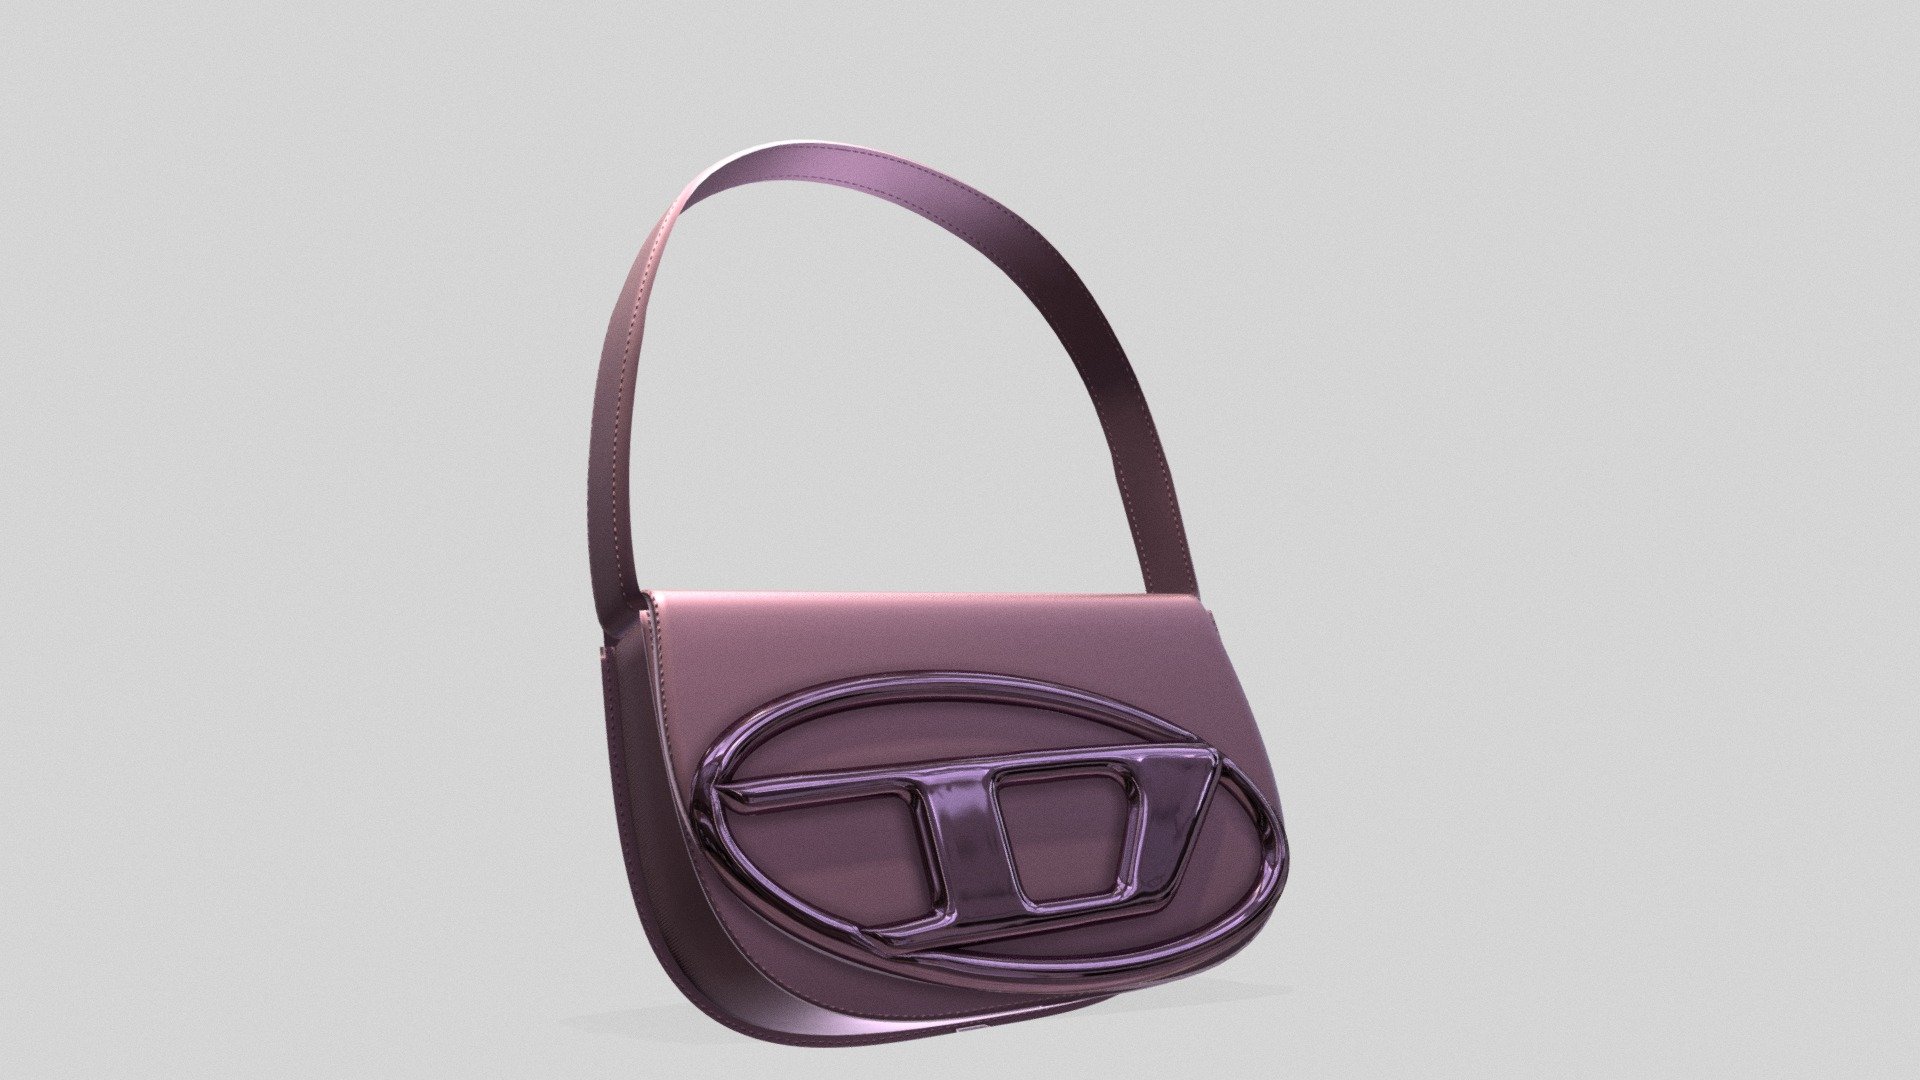 3D model made for FARFETCH.

Iconic Shoulder Bag in Mirrored Leather.
Created for VFX Simulation 3d model